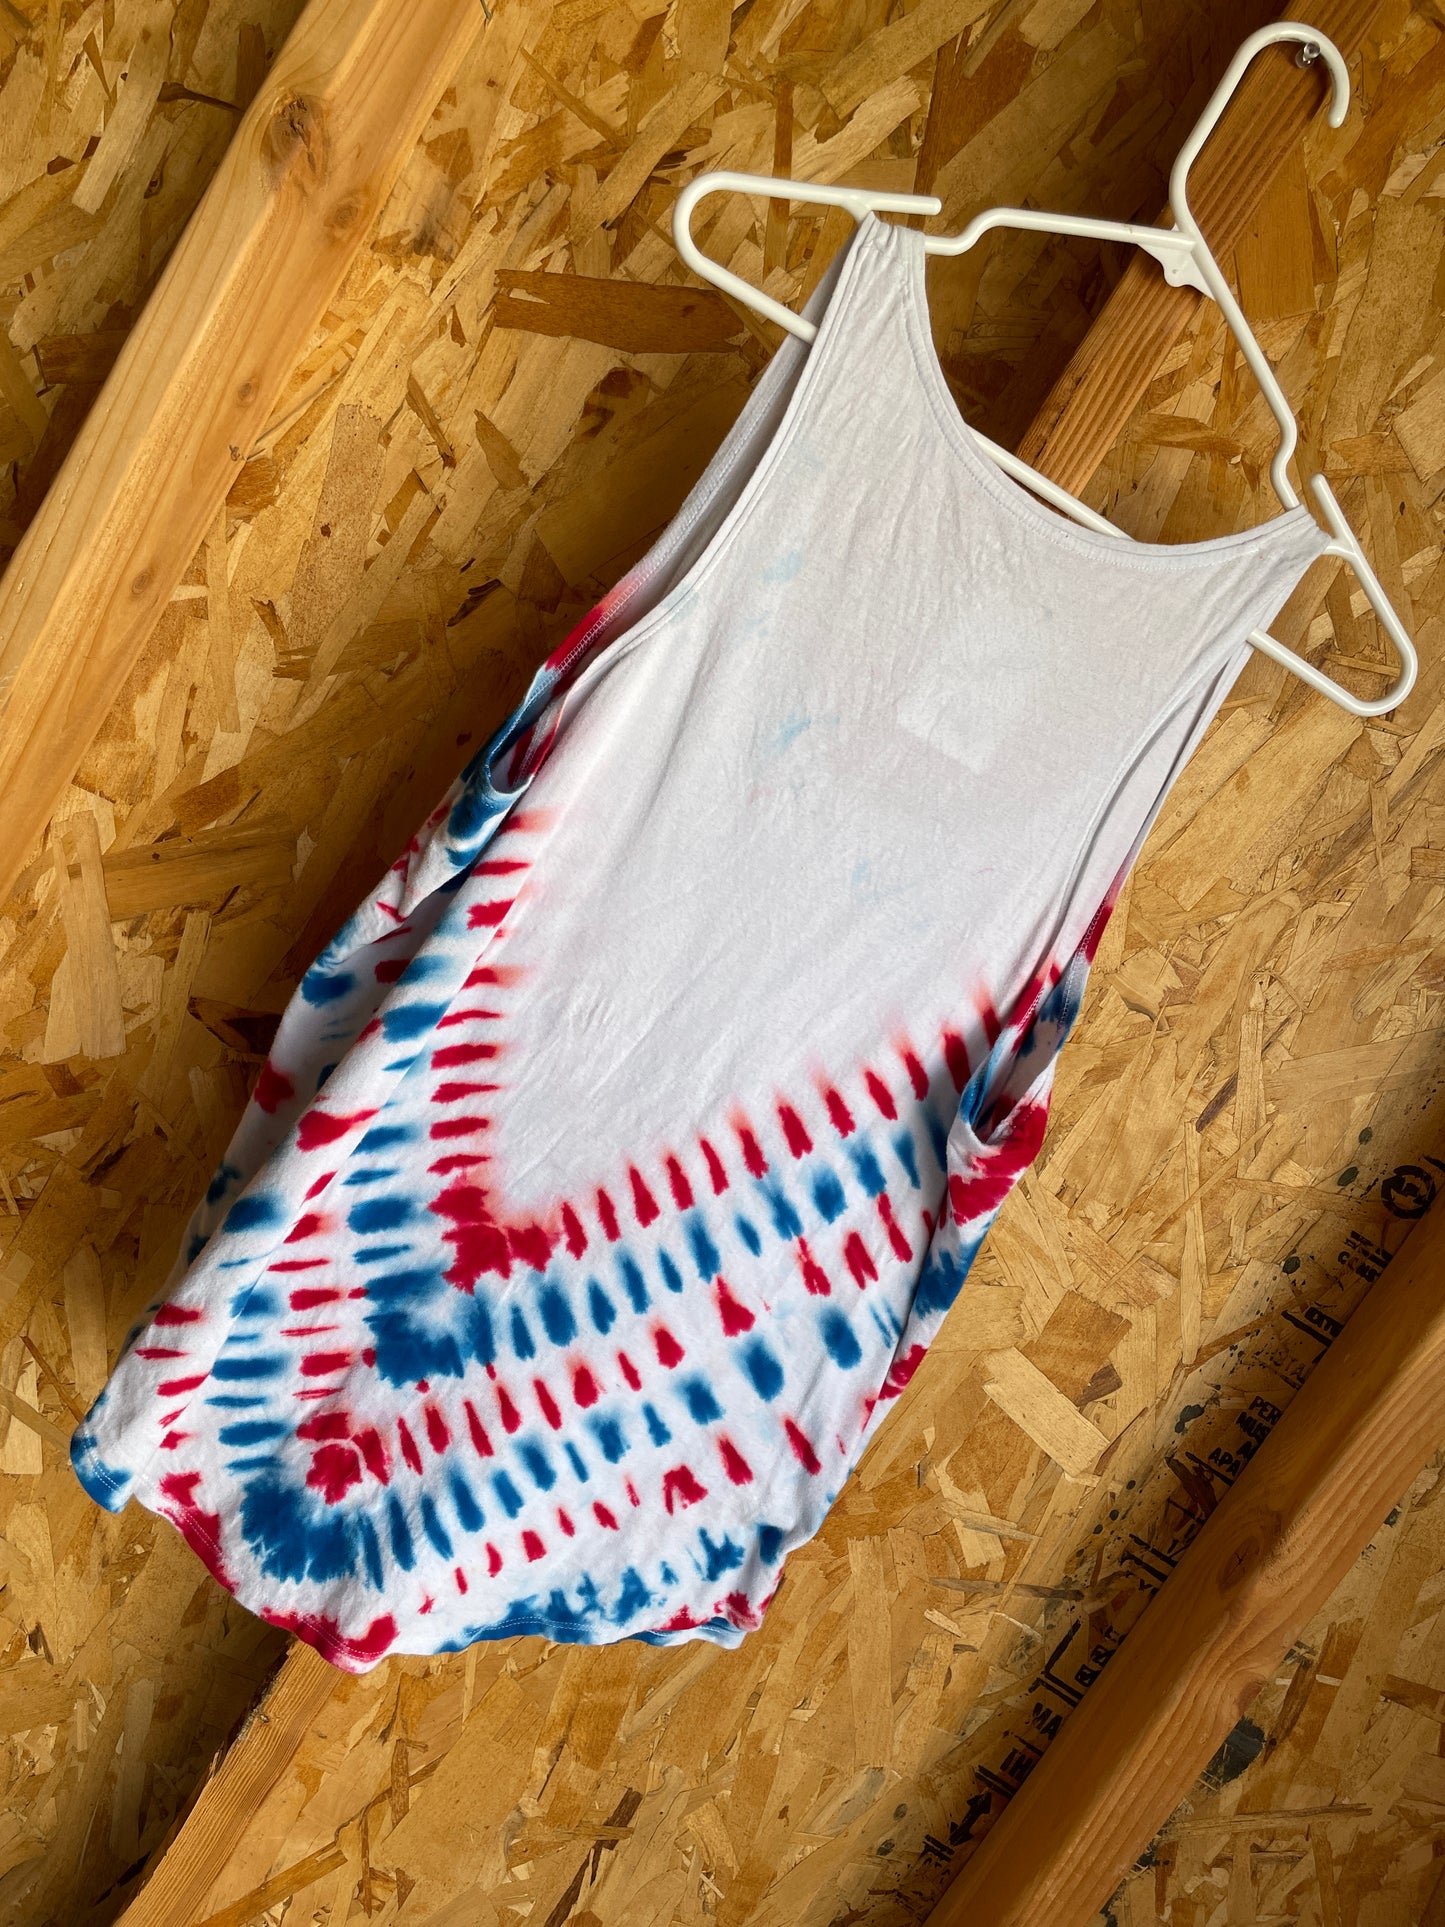 XL Women’s Red, White, and Blue Popsicle Handmade Tie Dye Tank Top | Patriotic V-Pleated Tie Dye Sleeveless Shirt